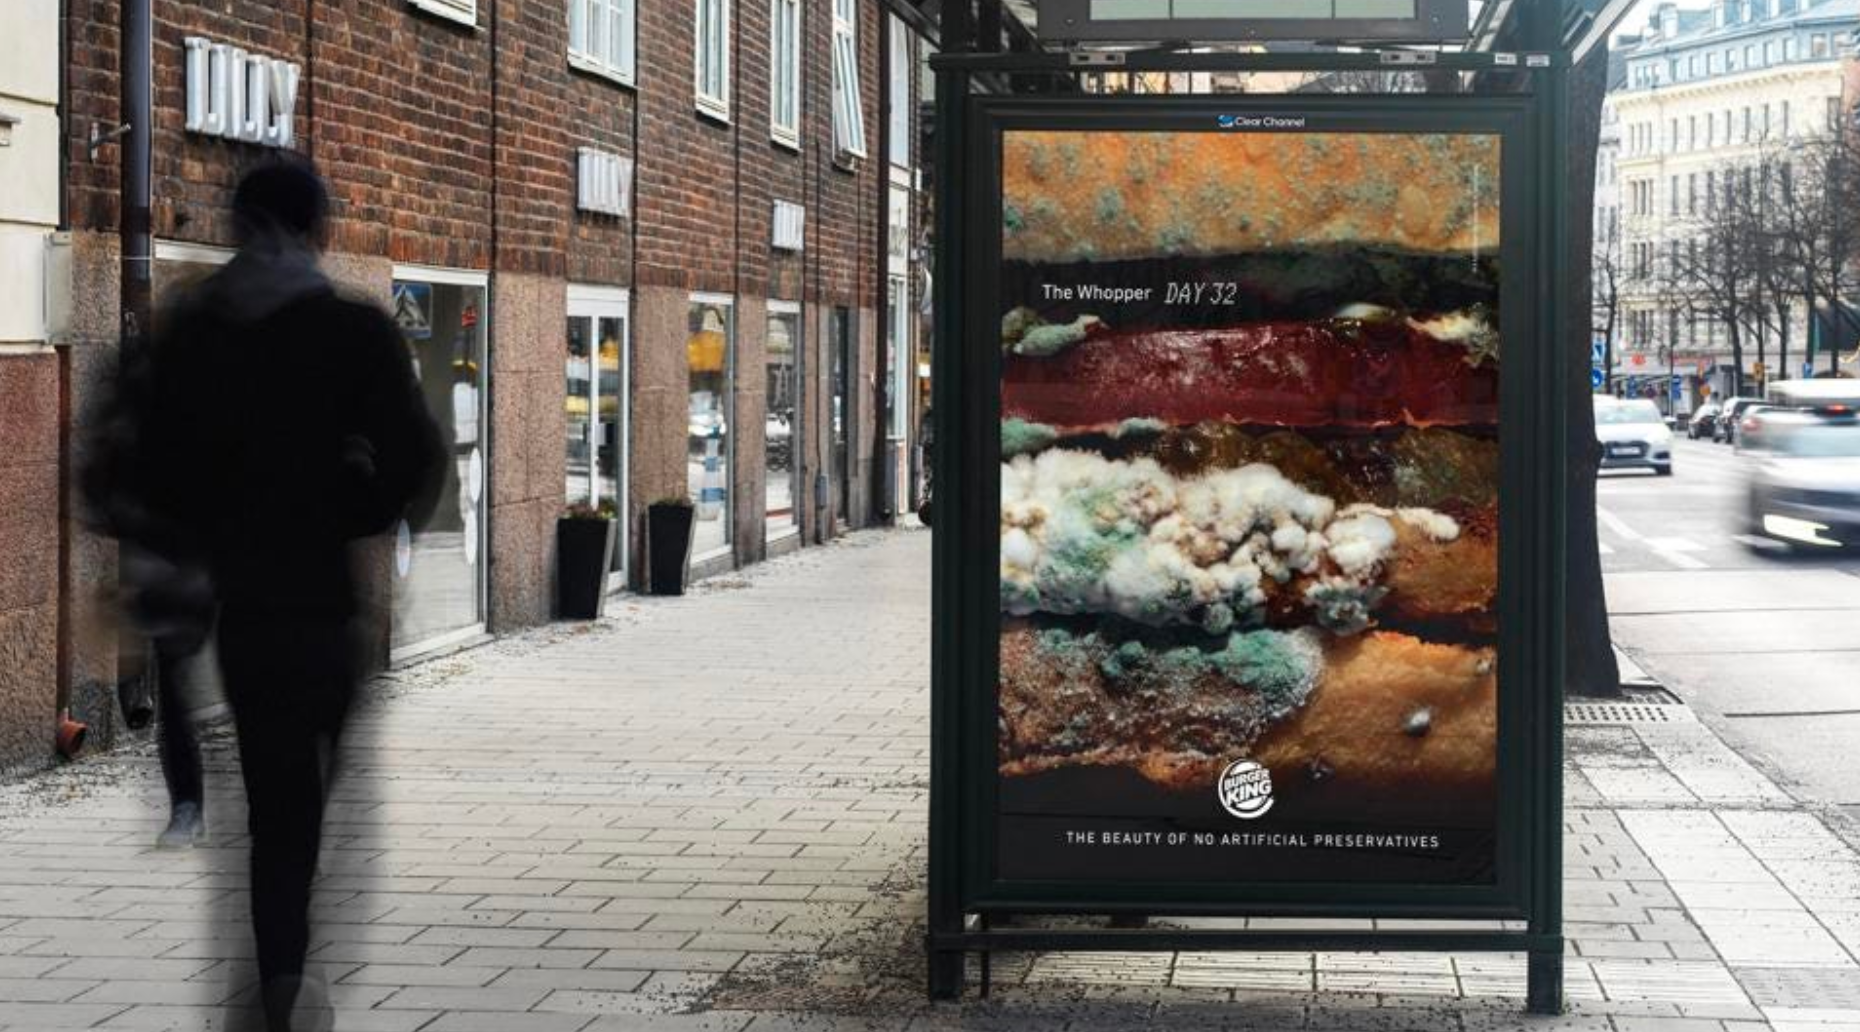 Burger King's new ad campaign featuring moldy Whoppers to show what happens over time when artificial ingredients are removed Source: BURGER KING